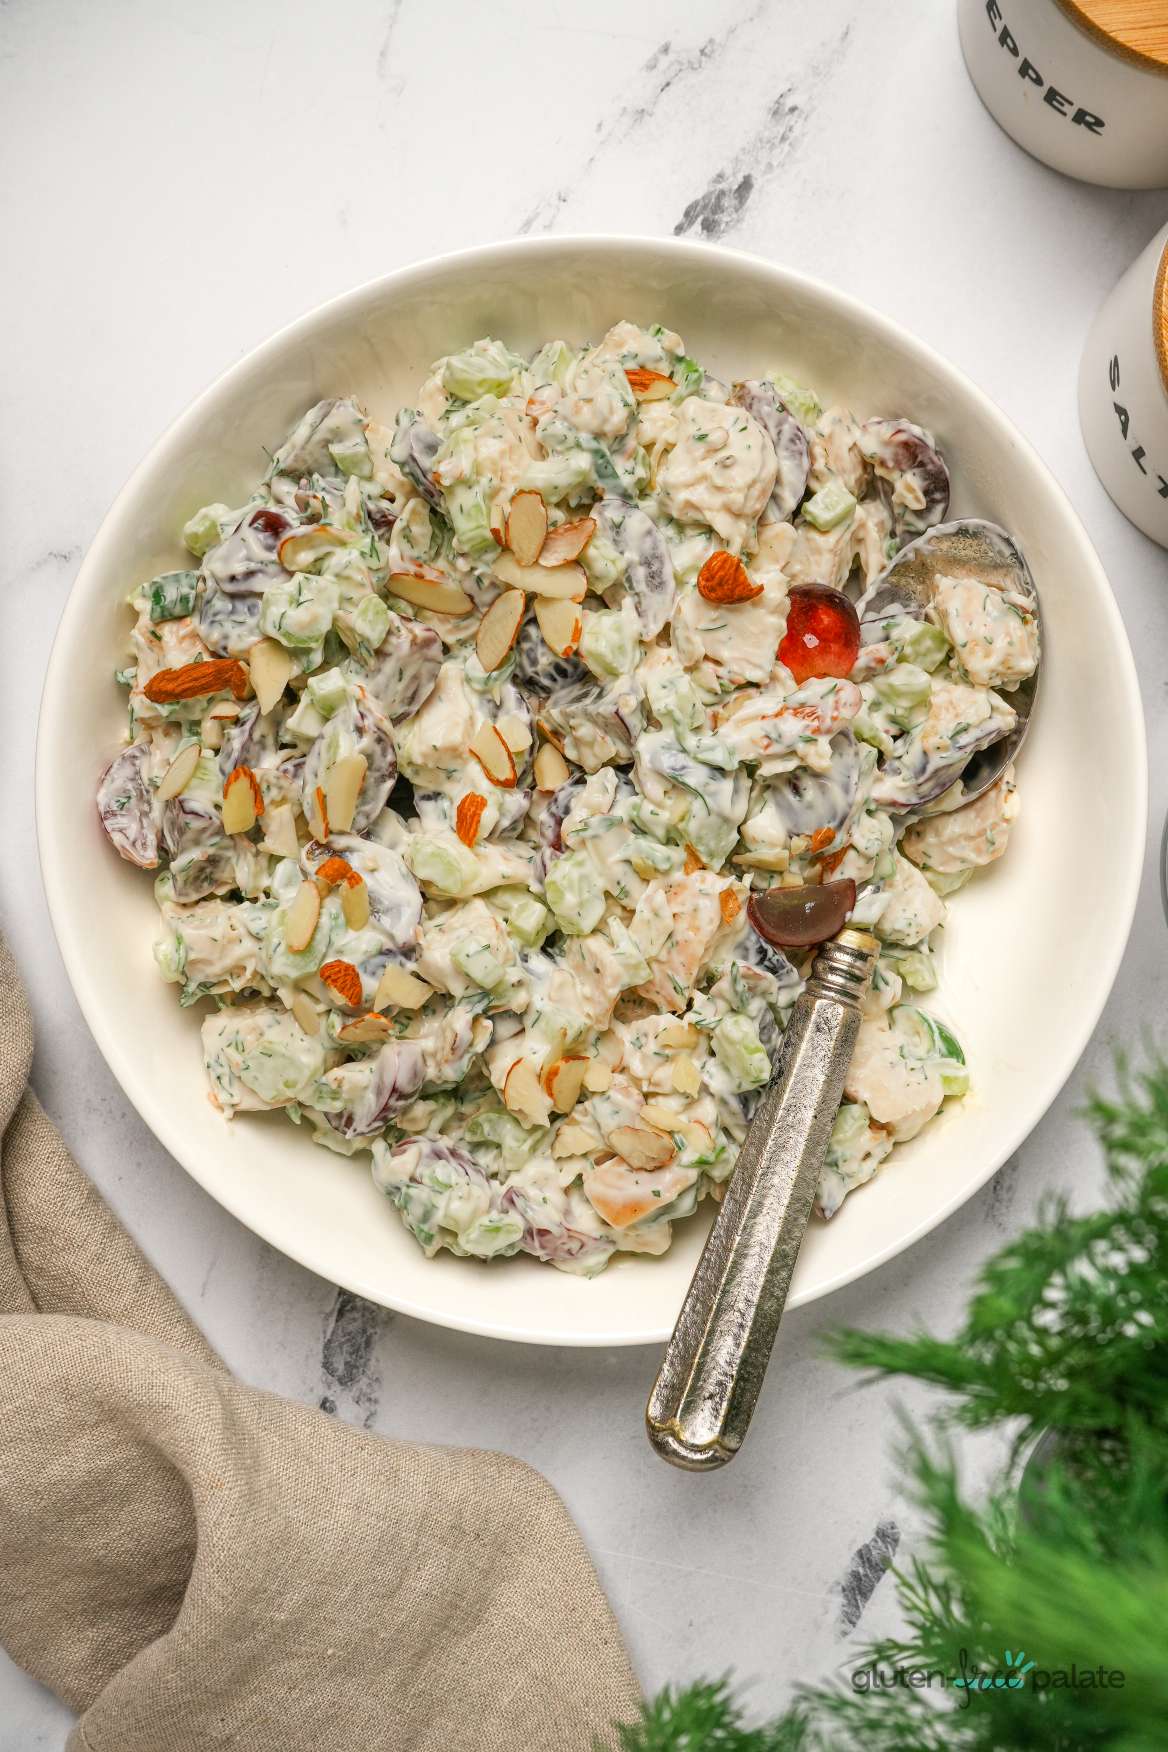 Gluten-free chicken salad in a white bowl with a serving spoon.